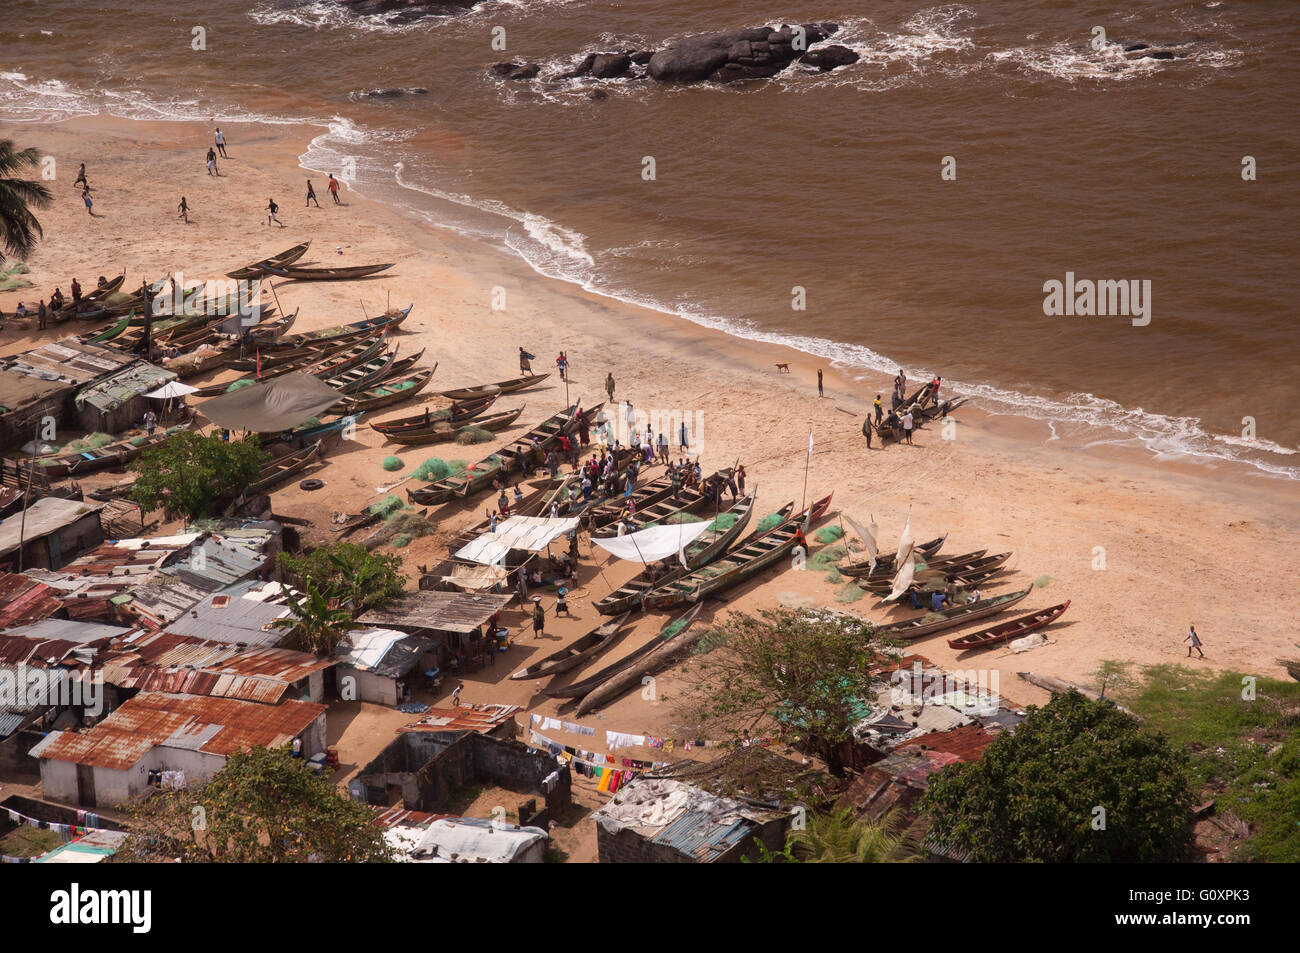 People, fishing nets and canoes make a for very interesting composition of everyday life on a beach west of Monrovia Liberia. Stock Photo